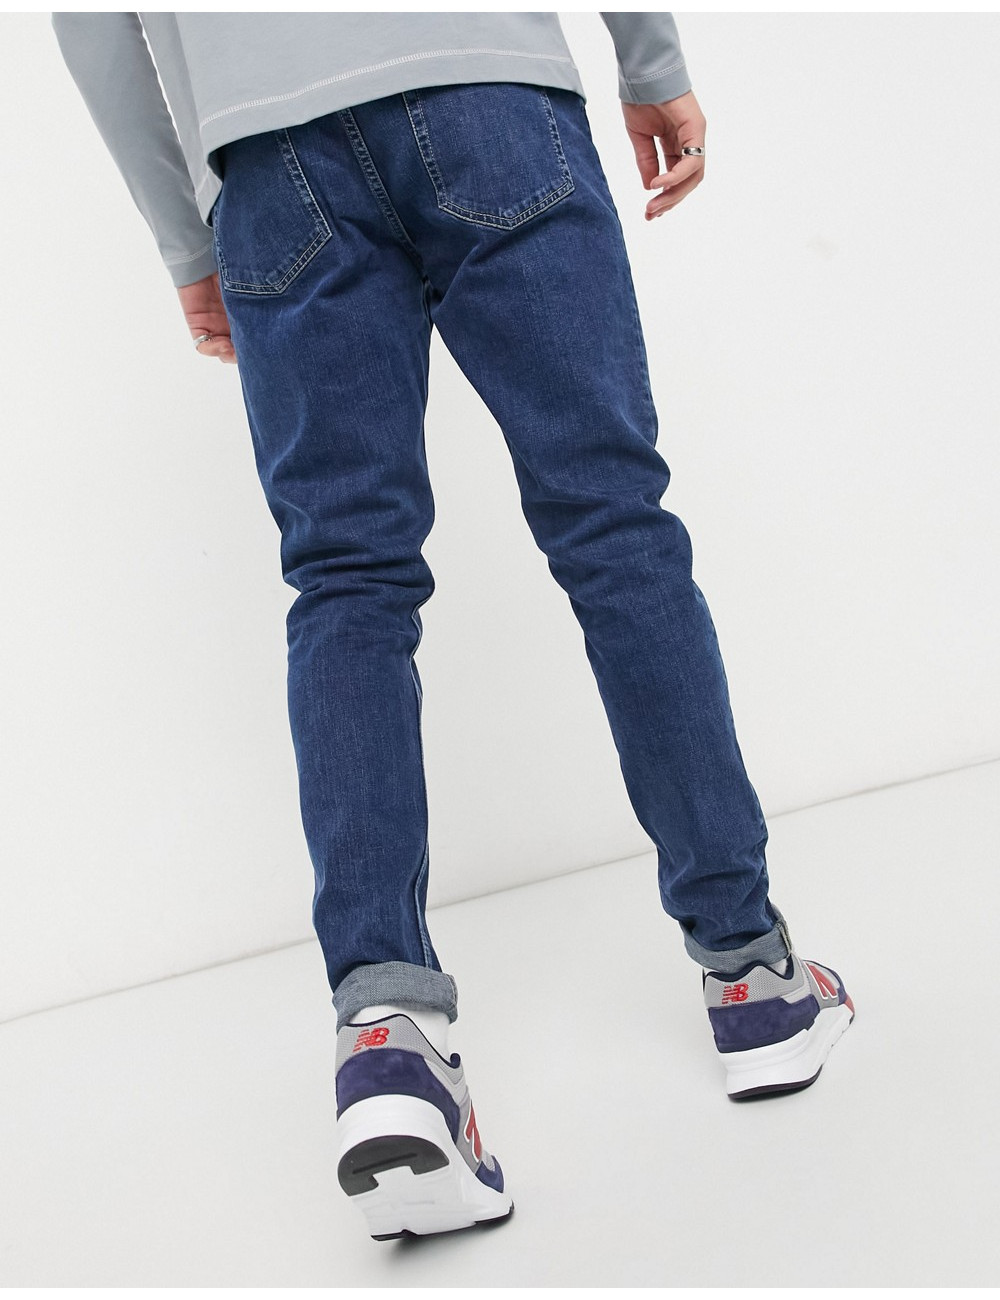 Weekday cone jeans in sway...